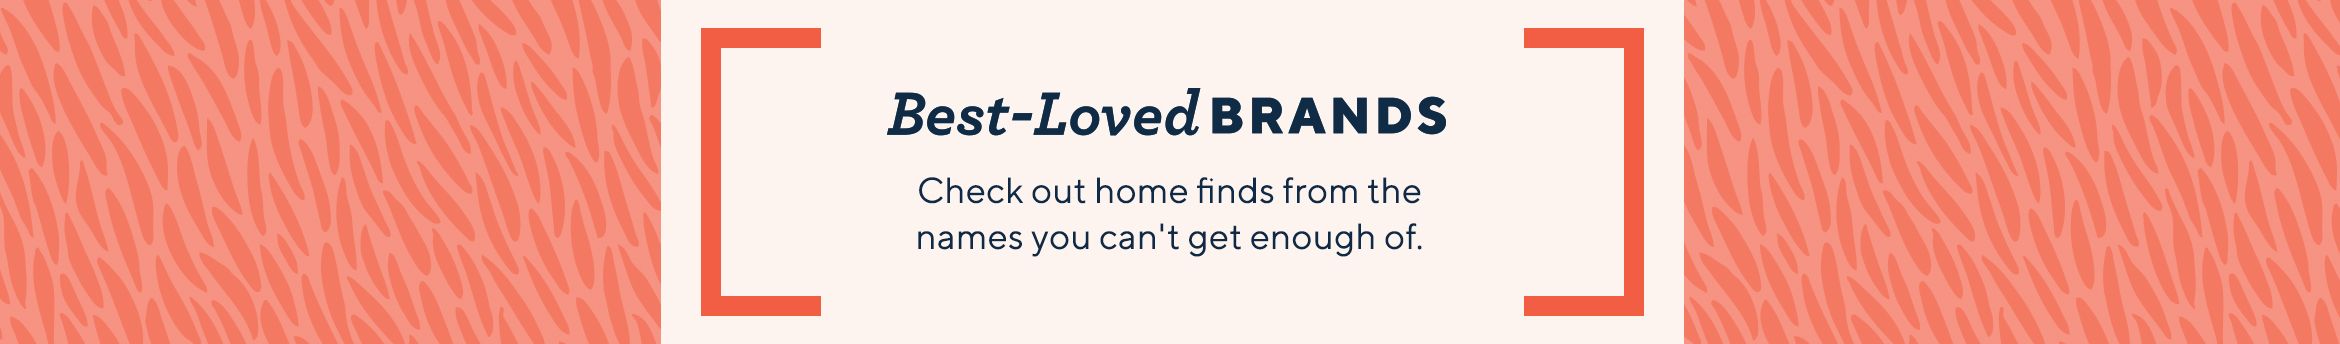 Best-Loved Brands.  Check out home finds from the names you can't get enough of.